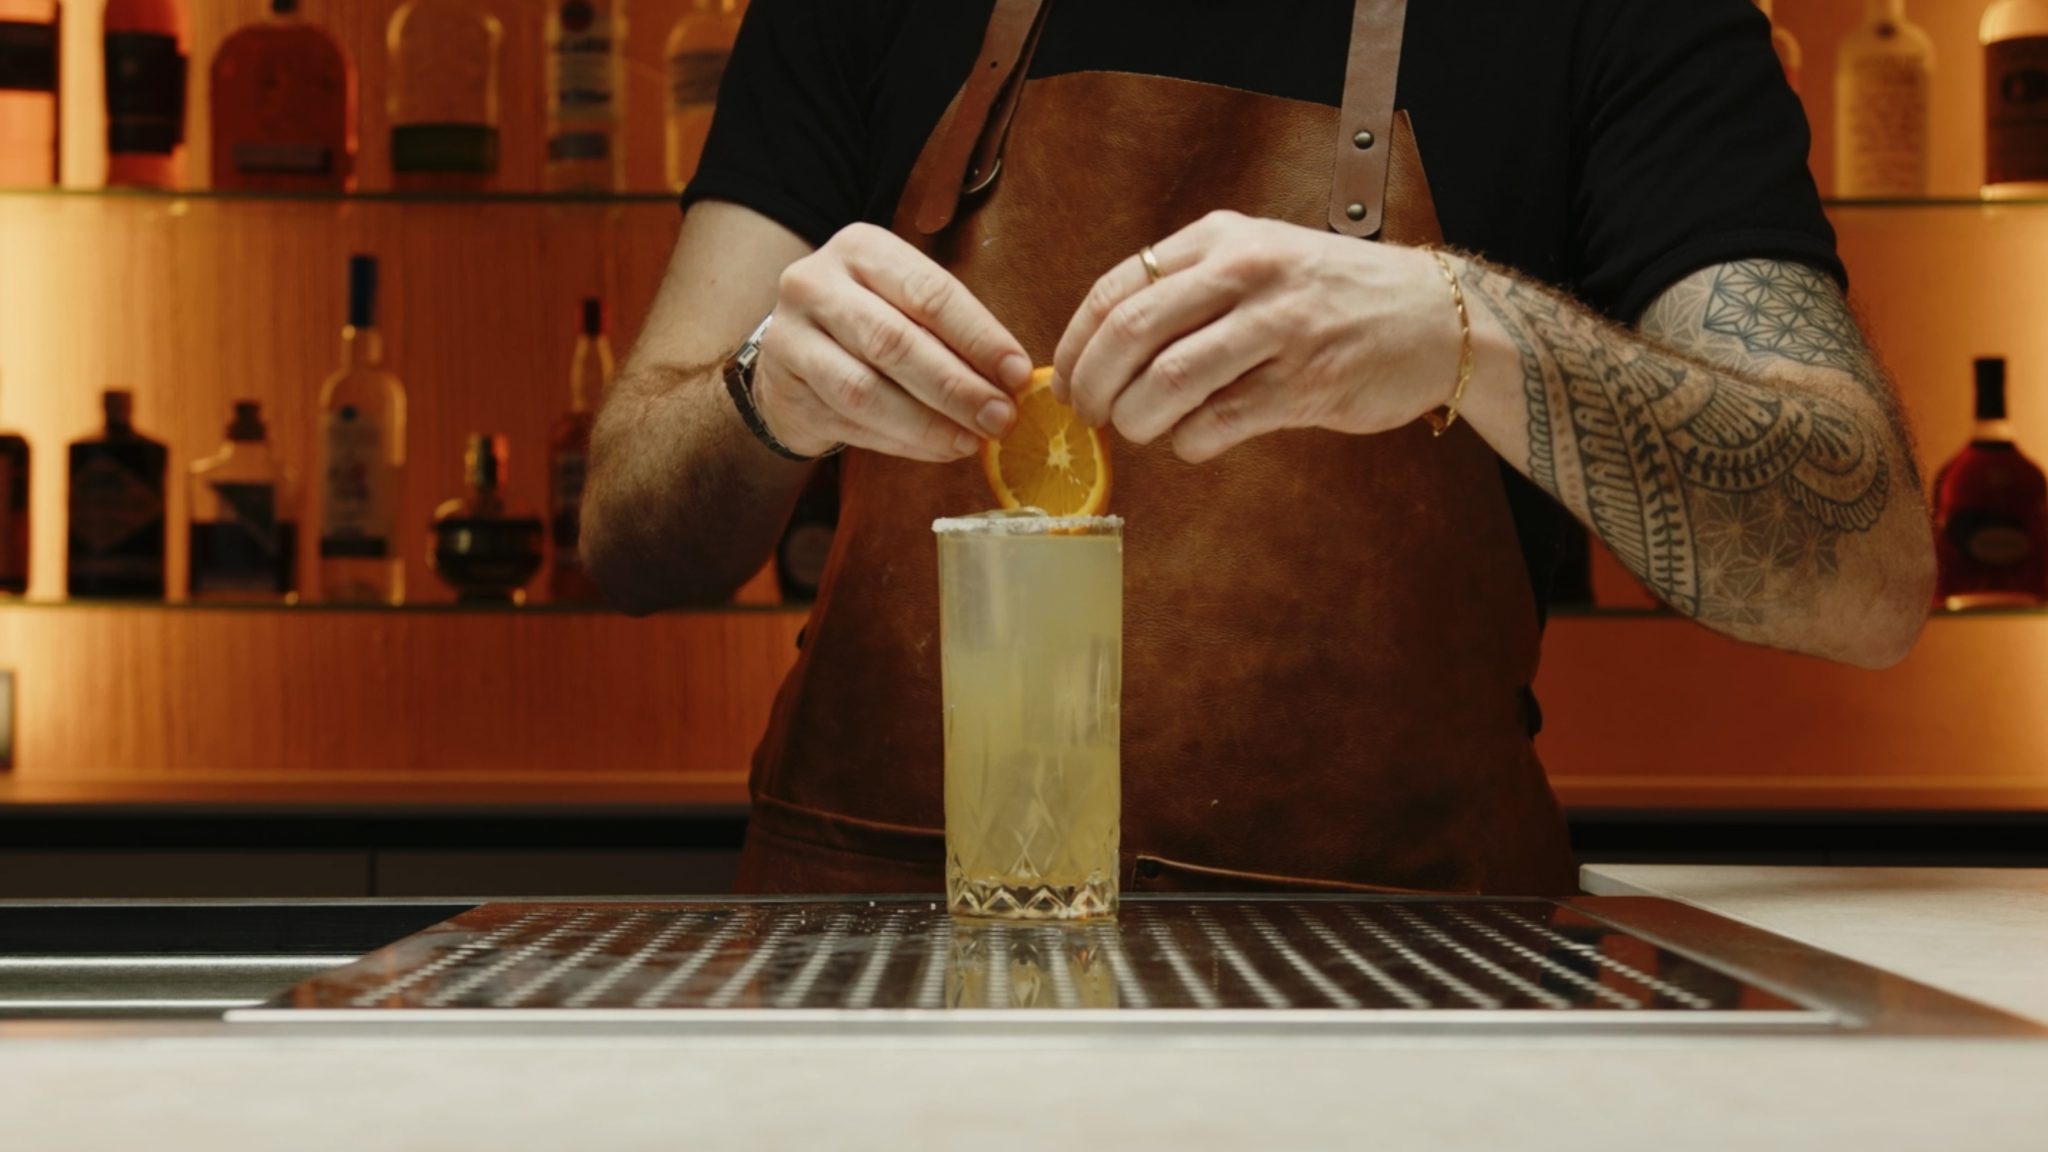 <p>Place a few citrus slices into the glass to enhance the visual appeal and aroma of the cocktail.</p>
